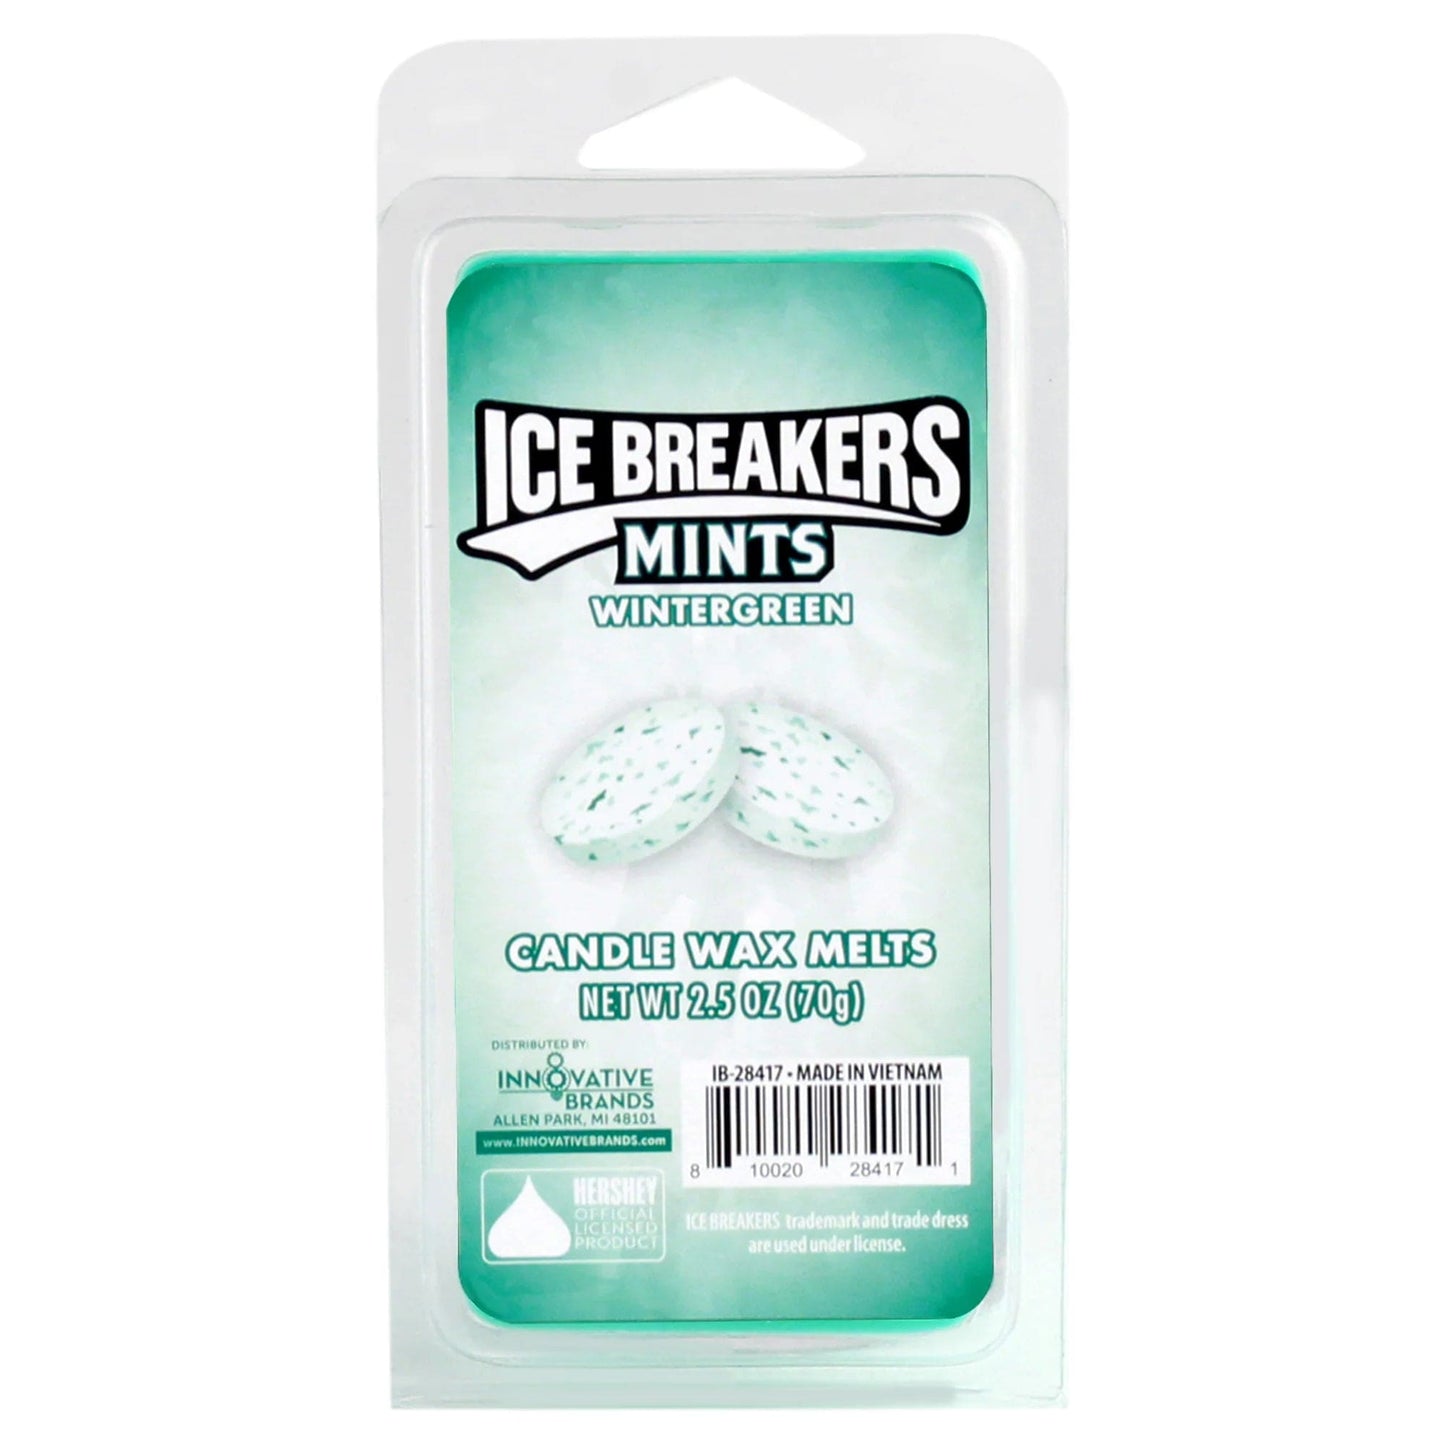 Sweet Tooth Candles Icebreakers Mints Wintergreen 2.5oz Candy Scented Wax Melts